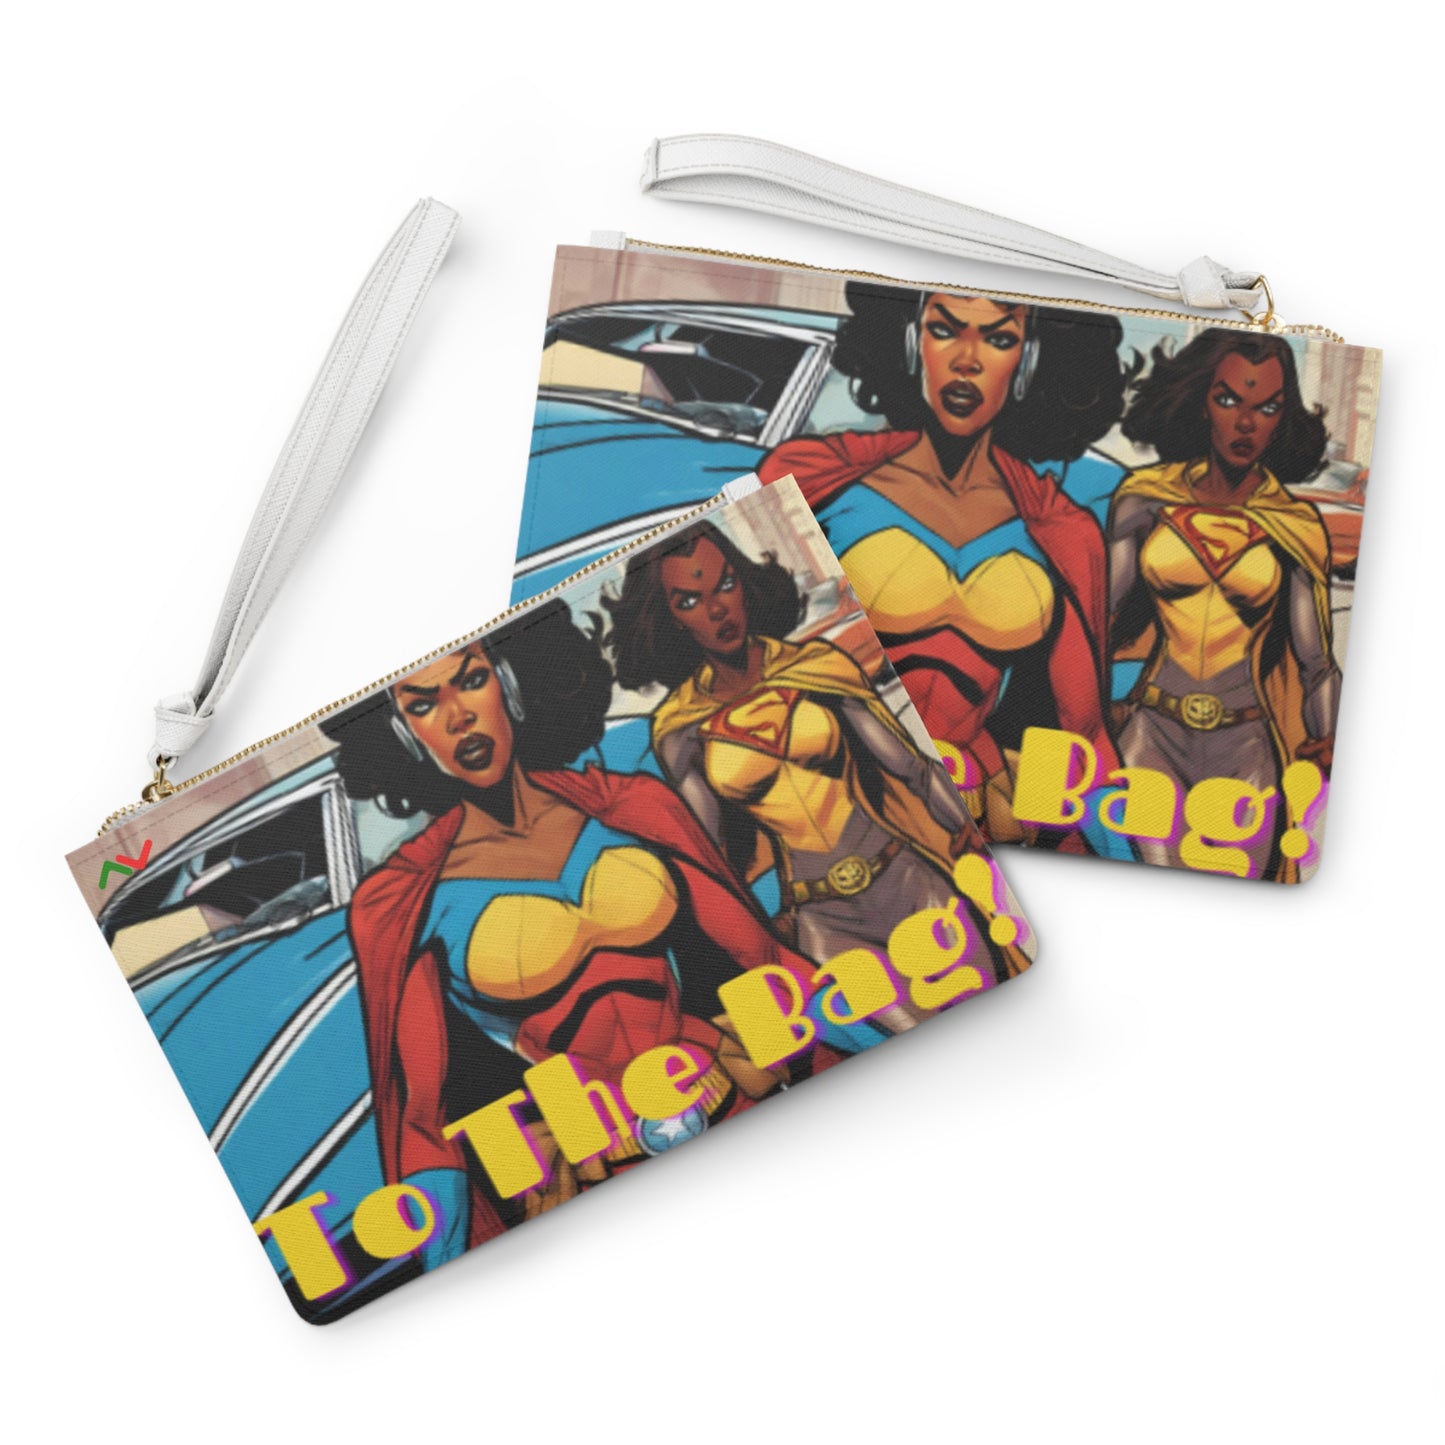 “To The Bag!”: Issue 1 Clutch